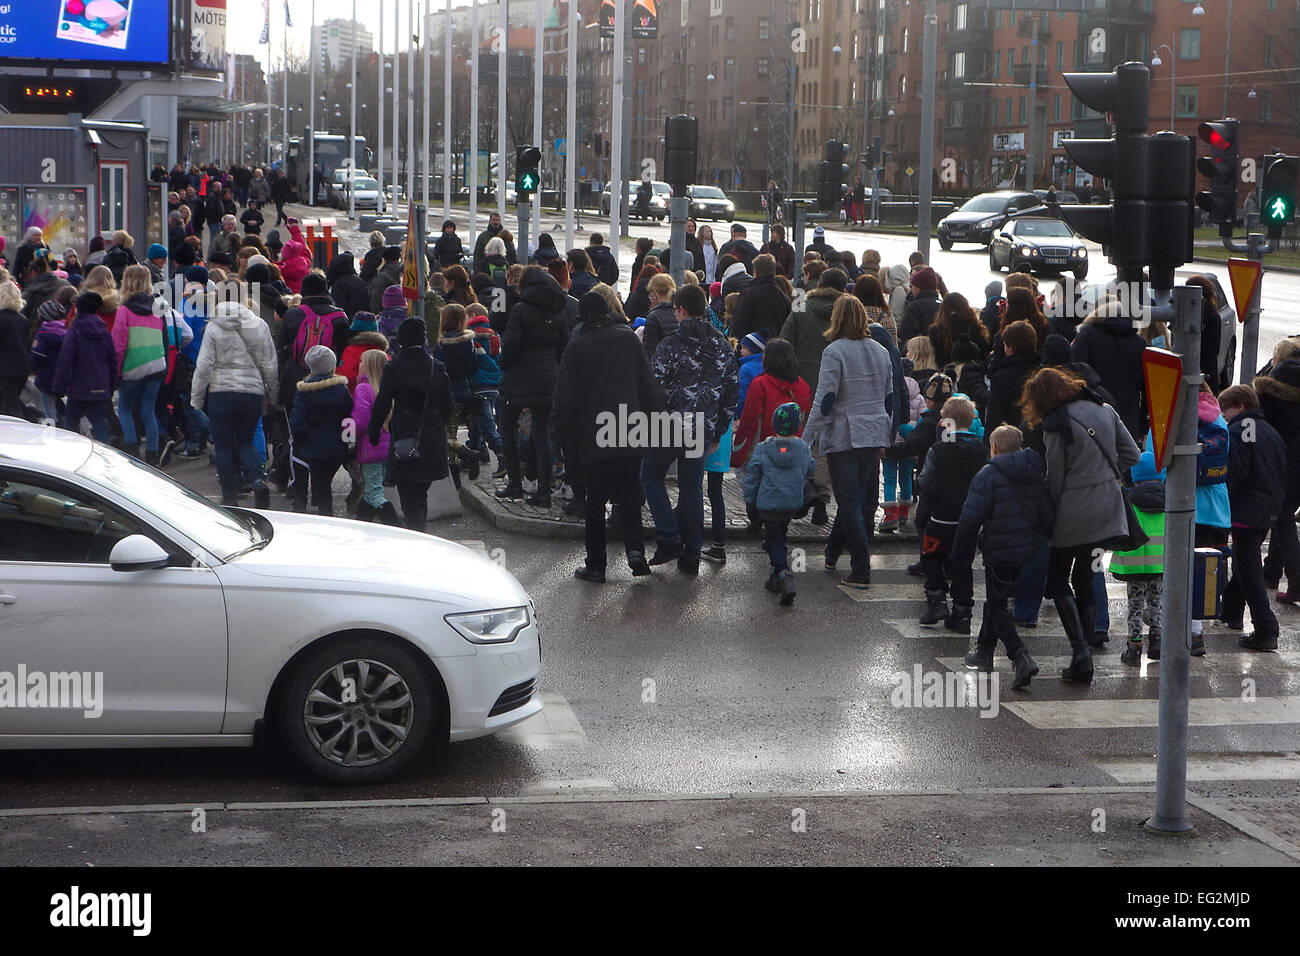 Children with parents go over the pedestrian crossing Stock Photo